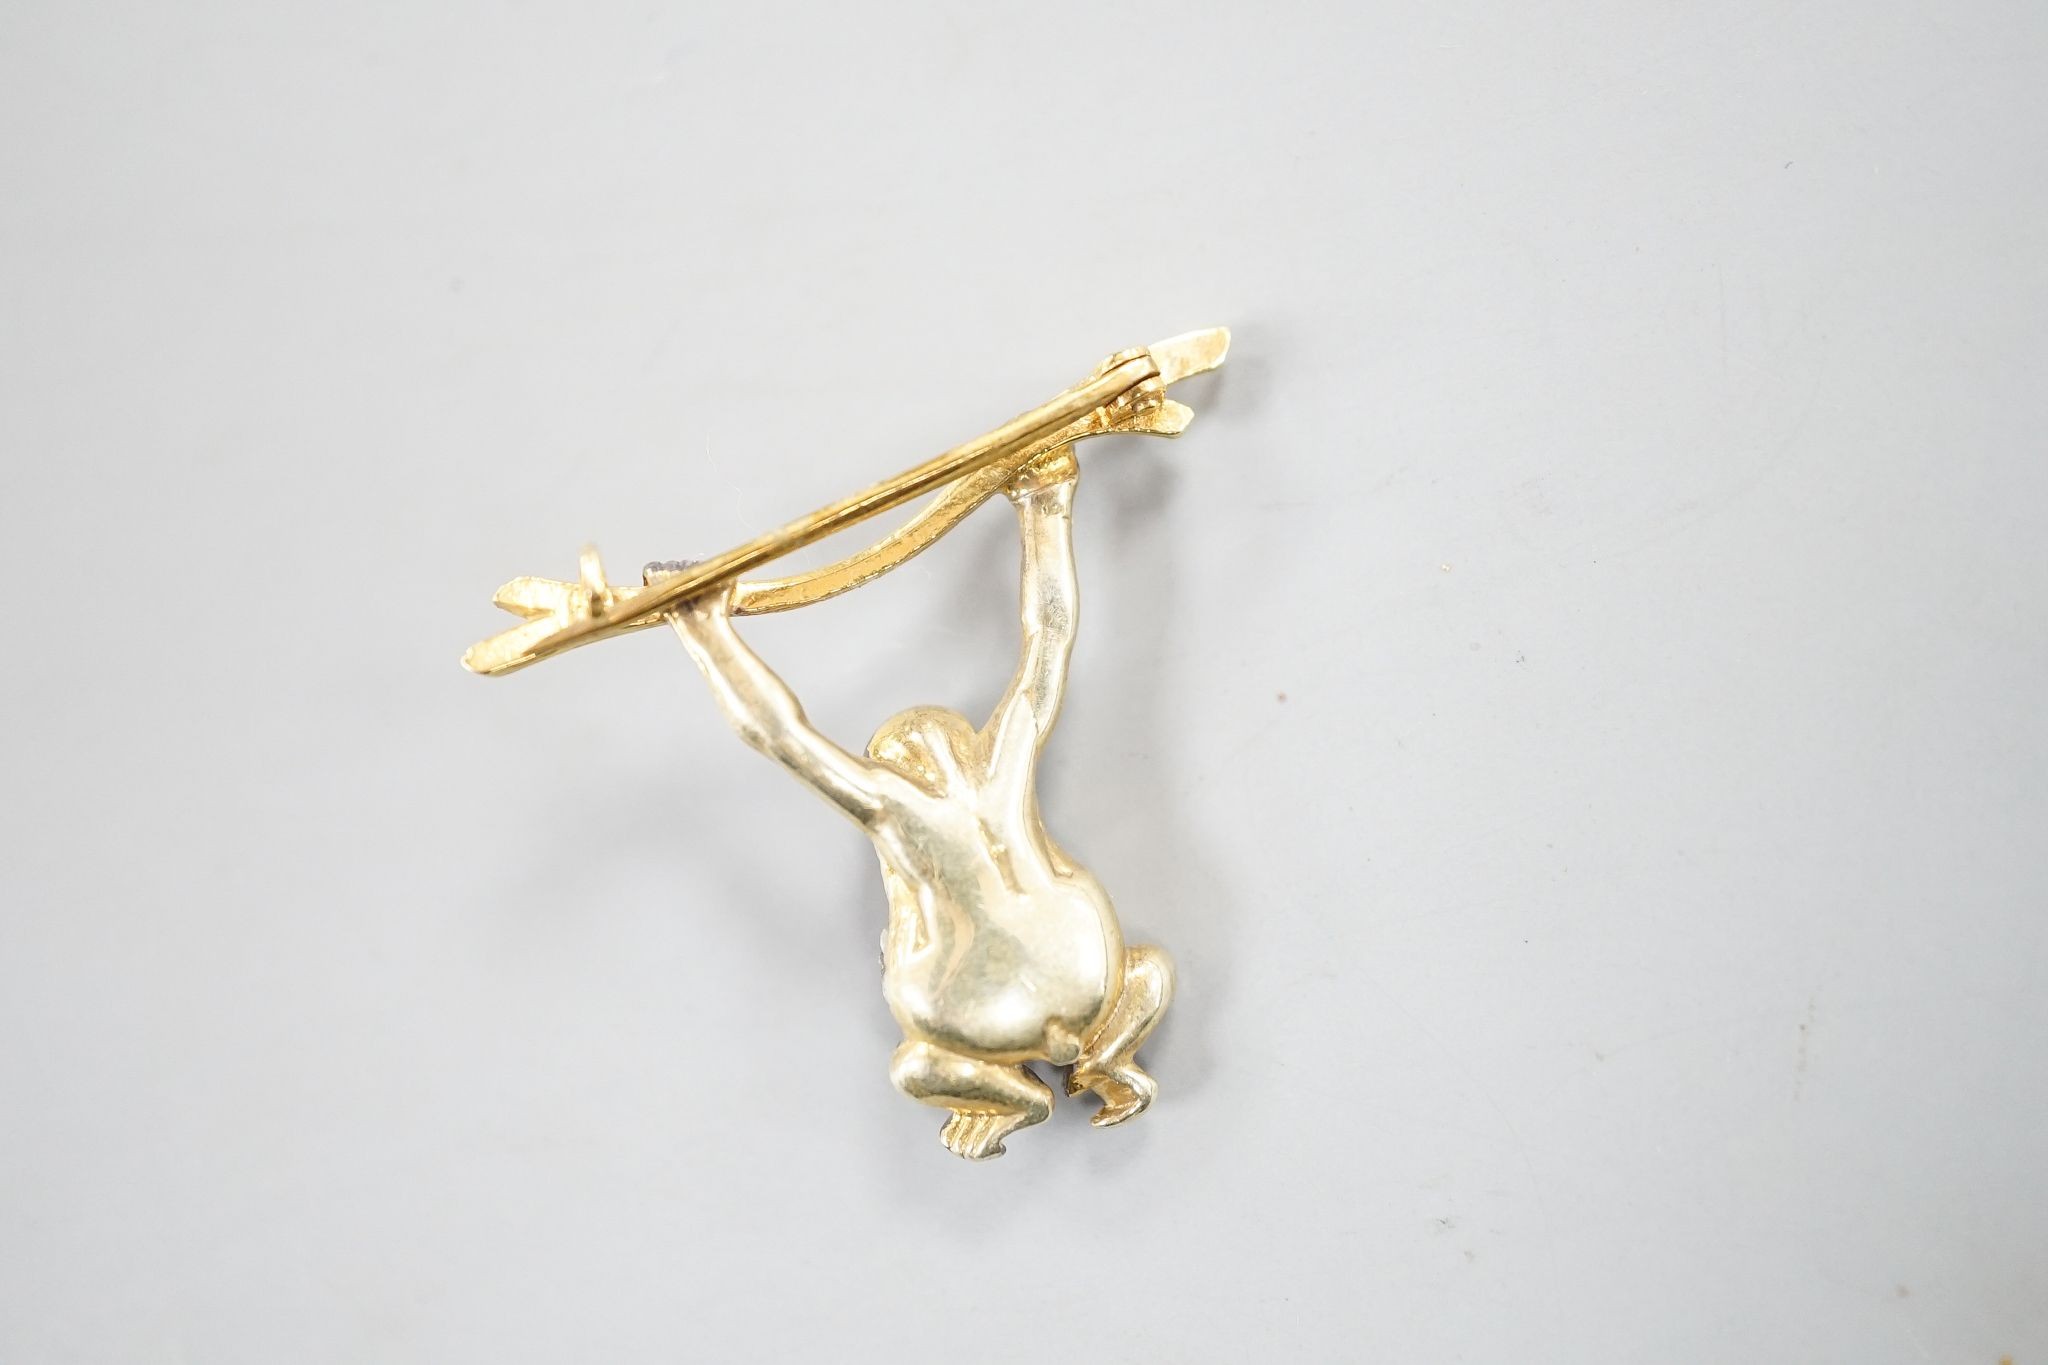 A Victorian style novelty white and yellow metal, diamond chip set brooch, modelled as a monkey hanging from a branch